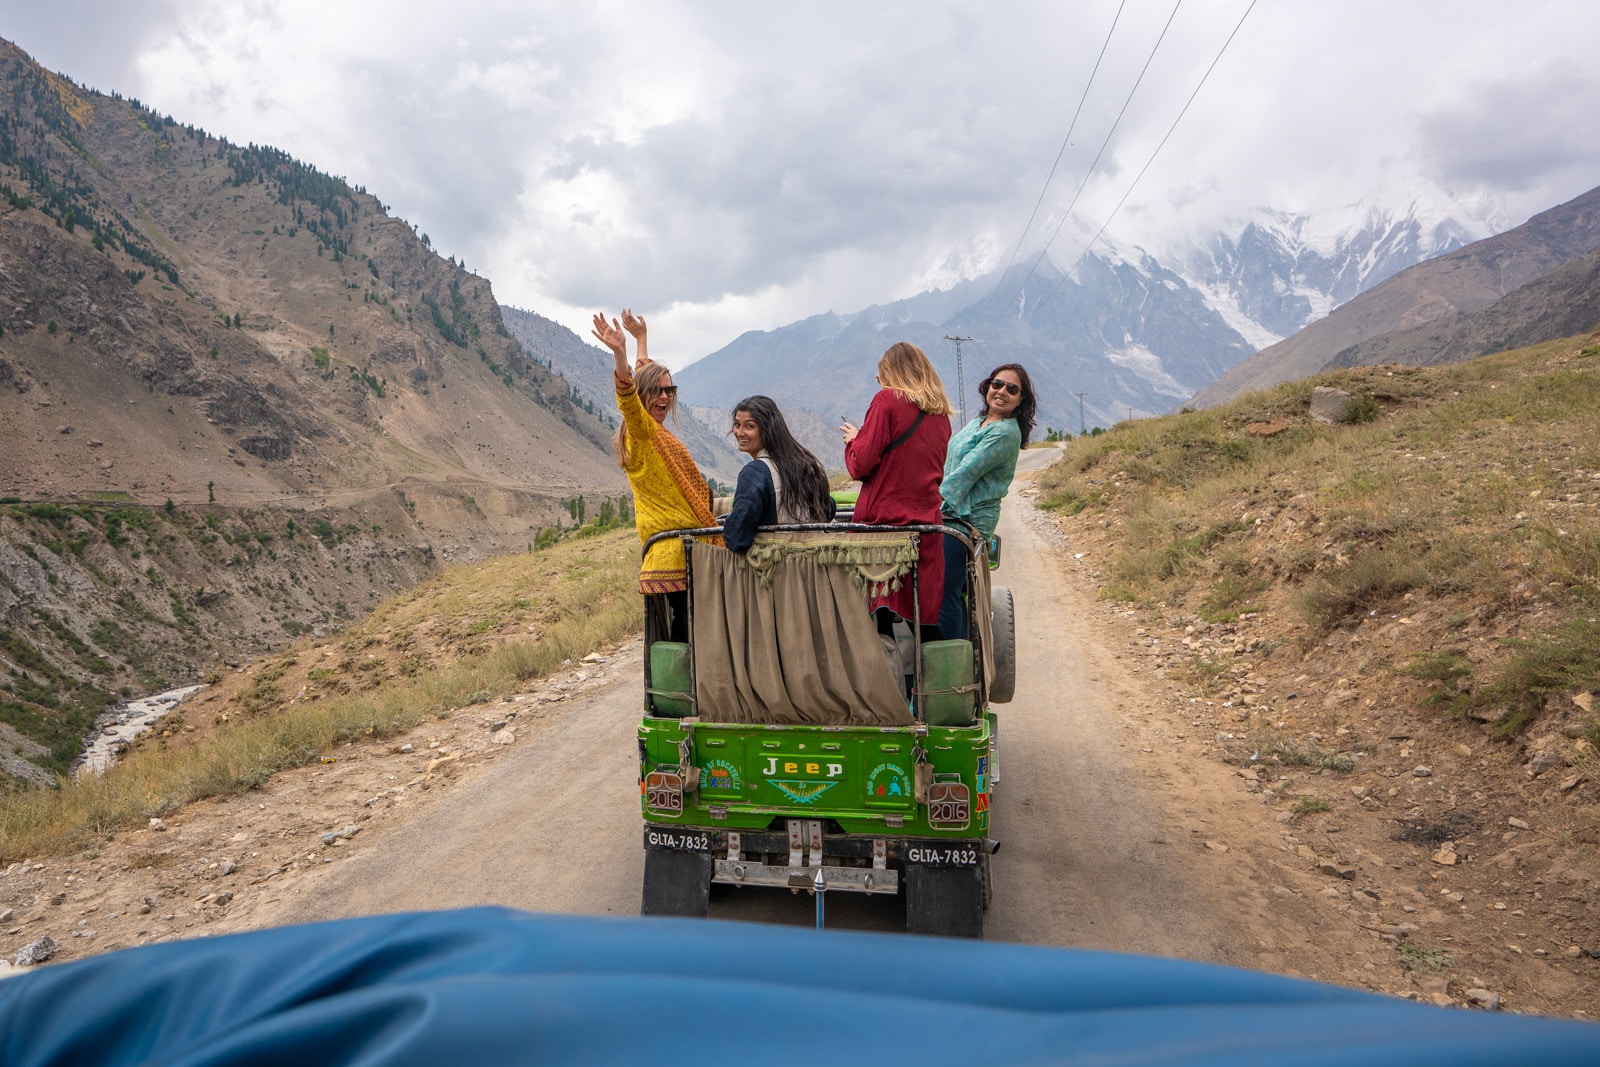 Girls riding in a private jeep in Astore, Pakistan